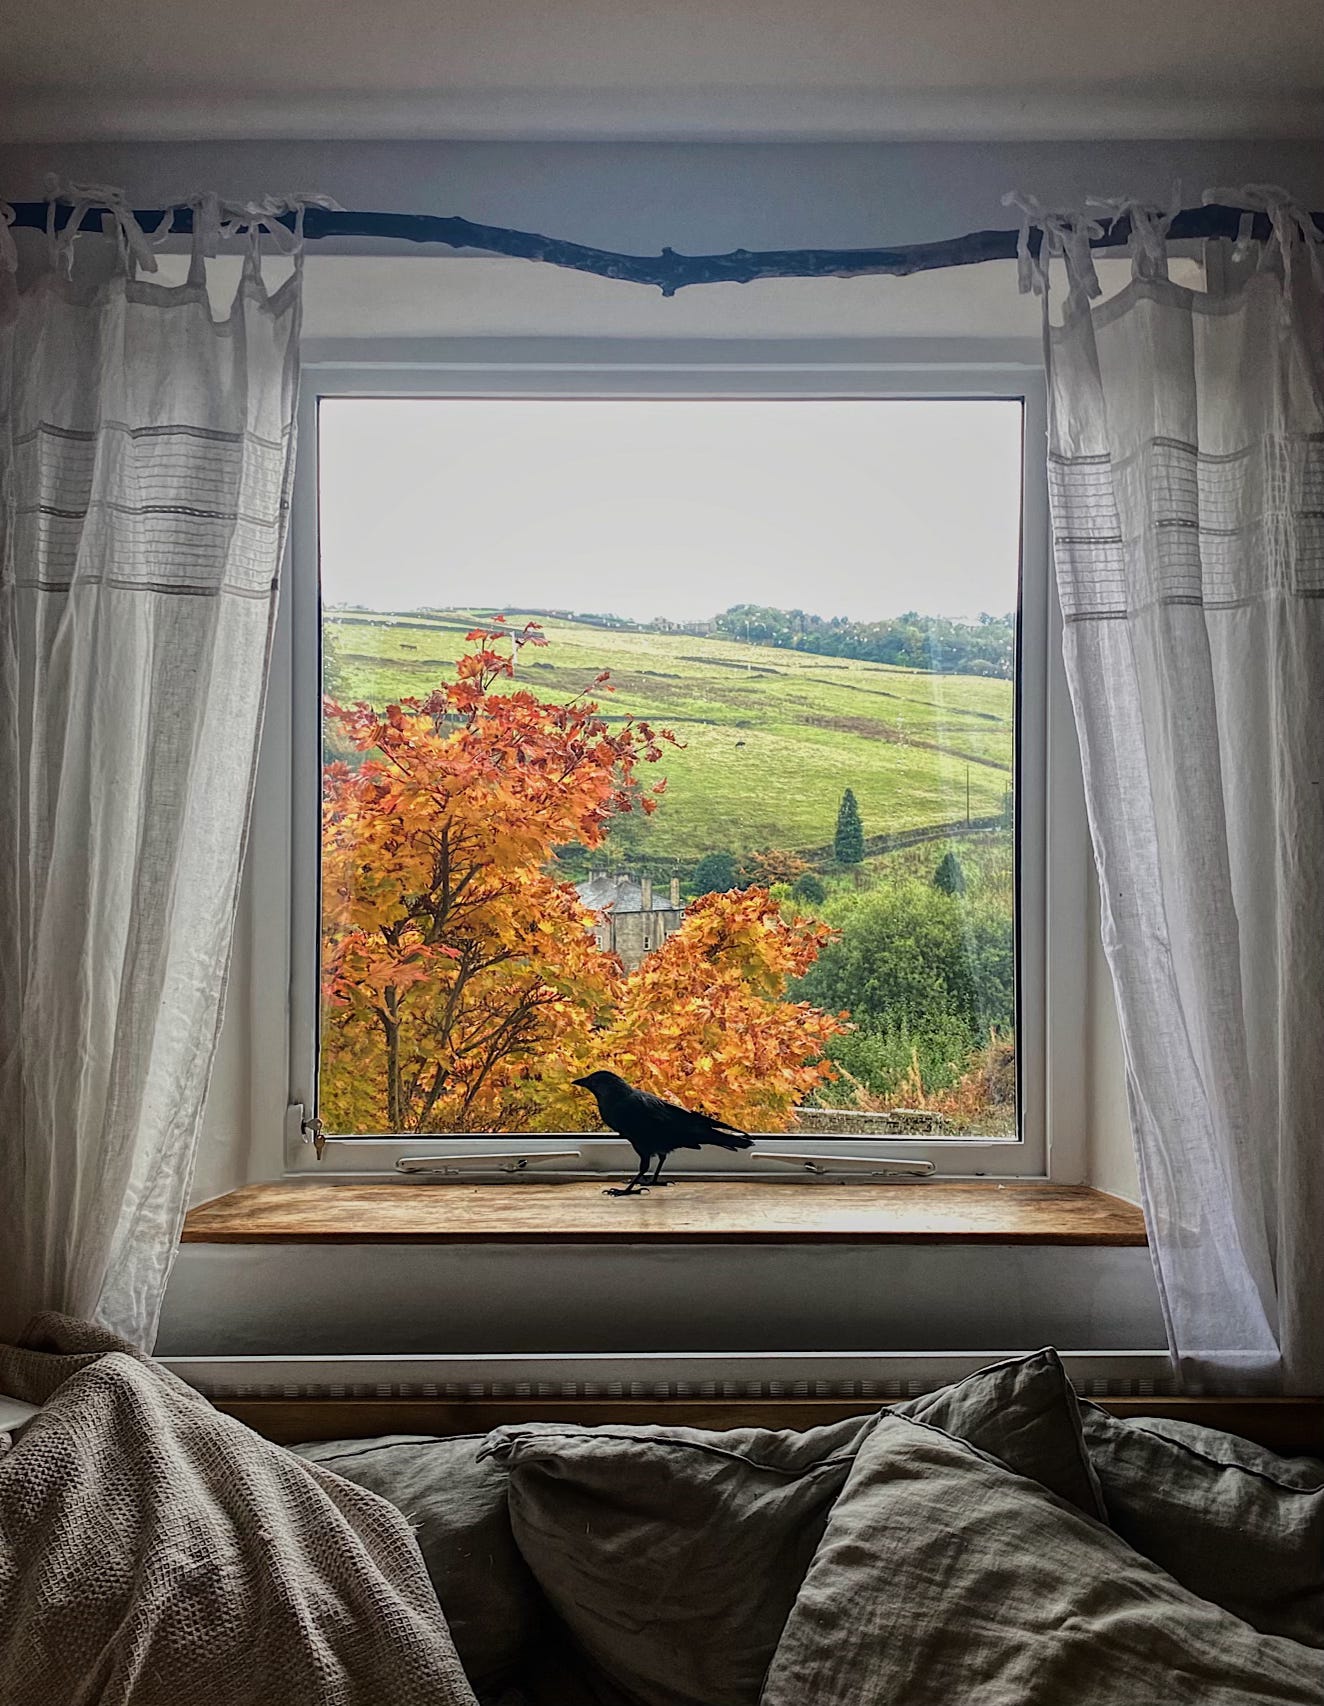 my living room window looking out onto yorkshire hills. a jackdaw sits on the inside window ledge.